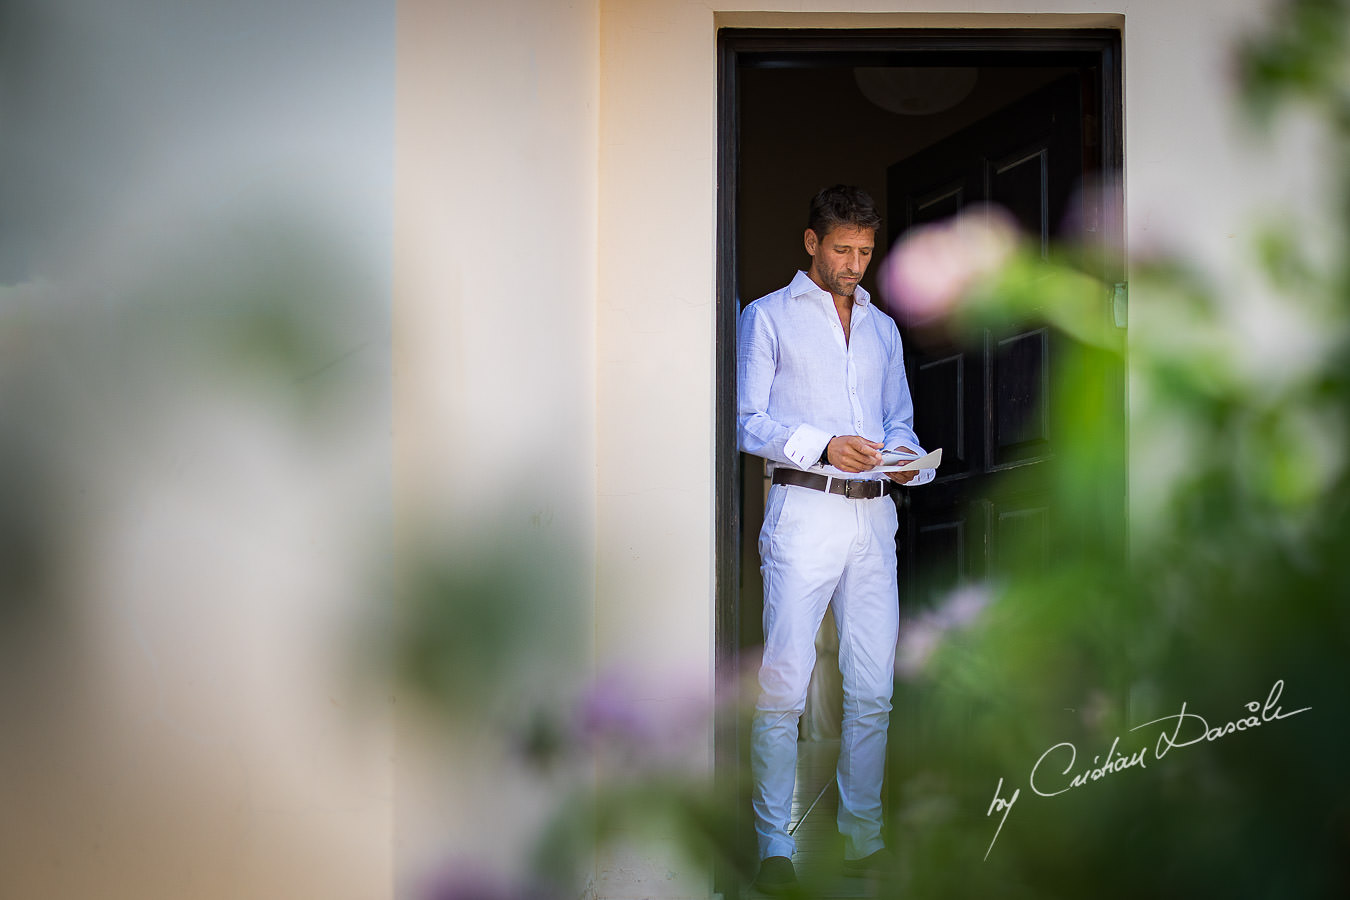 Moments with Jurian, the groom at Cap St. George captured during a beautiful wedding in Paphos by Cyprus Photographer Cristian Dascalu.